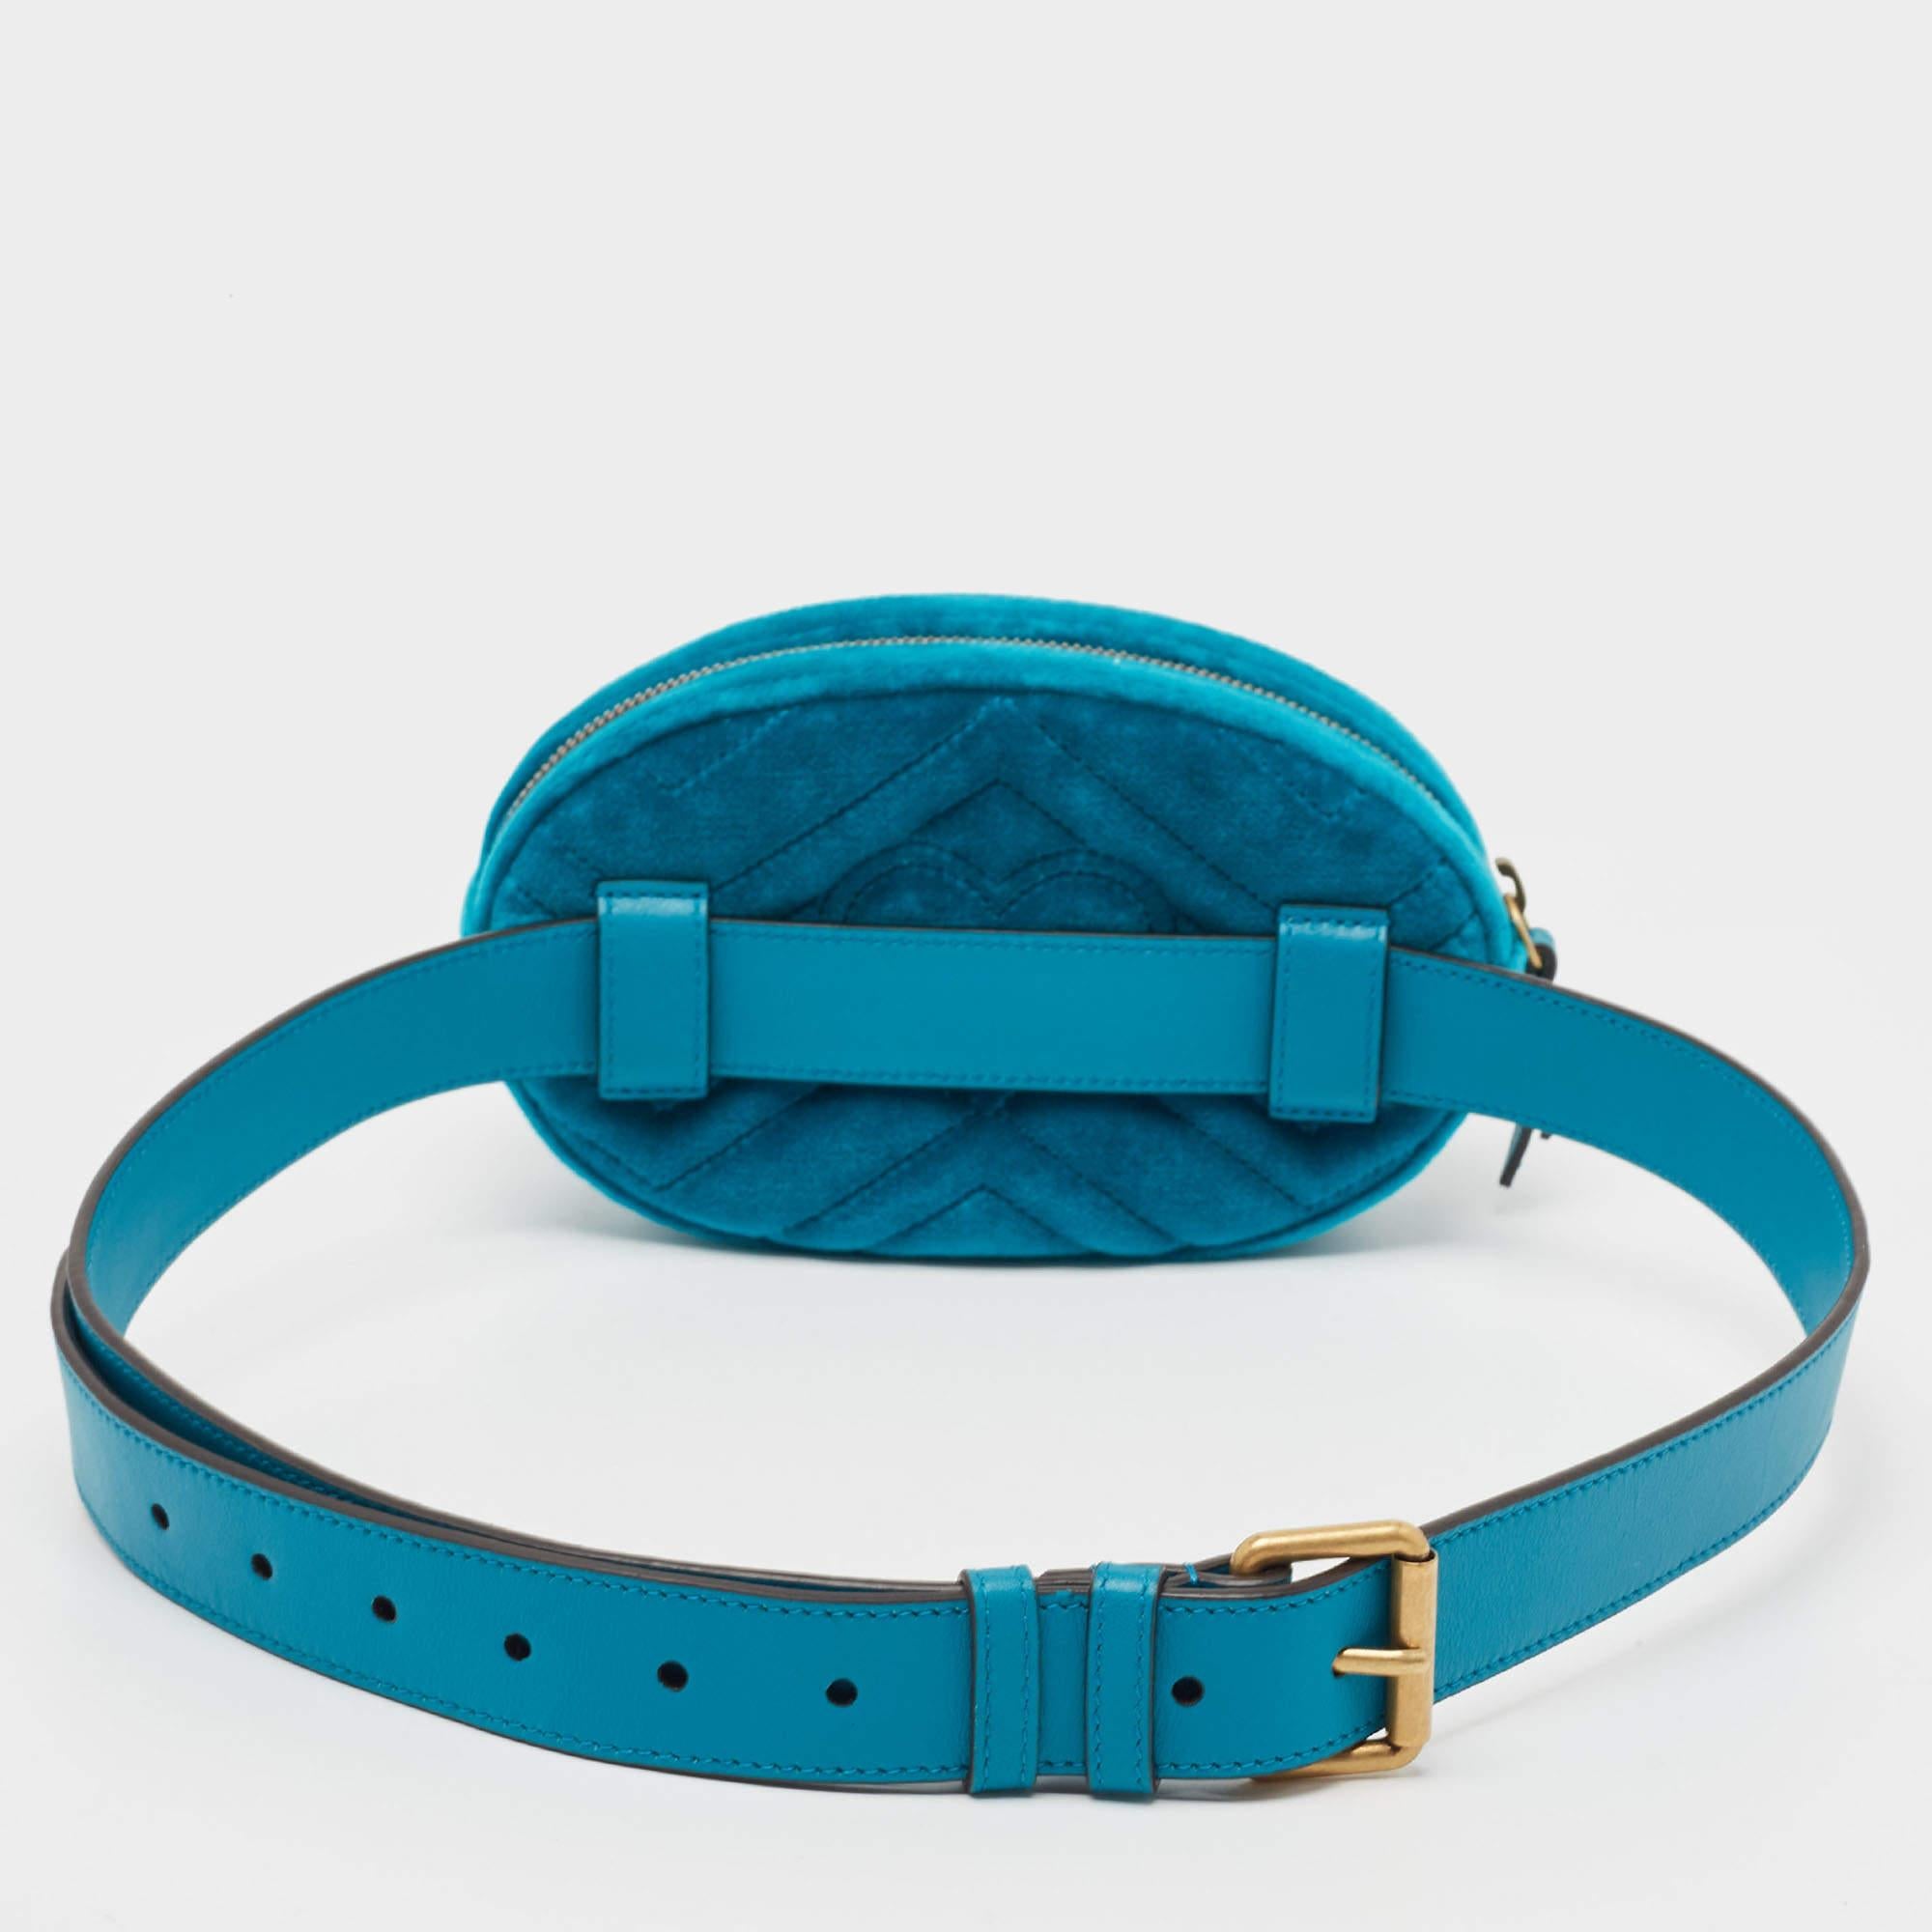 Belt bags are edgy, stylish and will never disappoint you when it comes to completing an outfit! This Gucci one is crafted wonderfully with a smart exterior, a compact, well-lined interior, and an adjustable belt that sits perfectly on your waist.